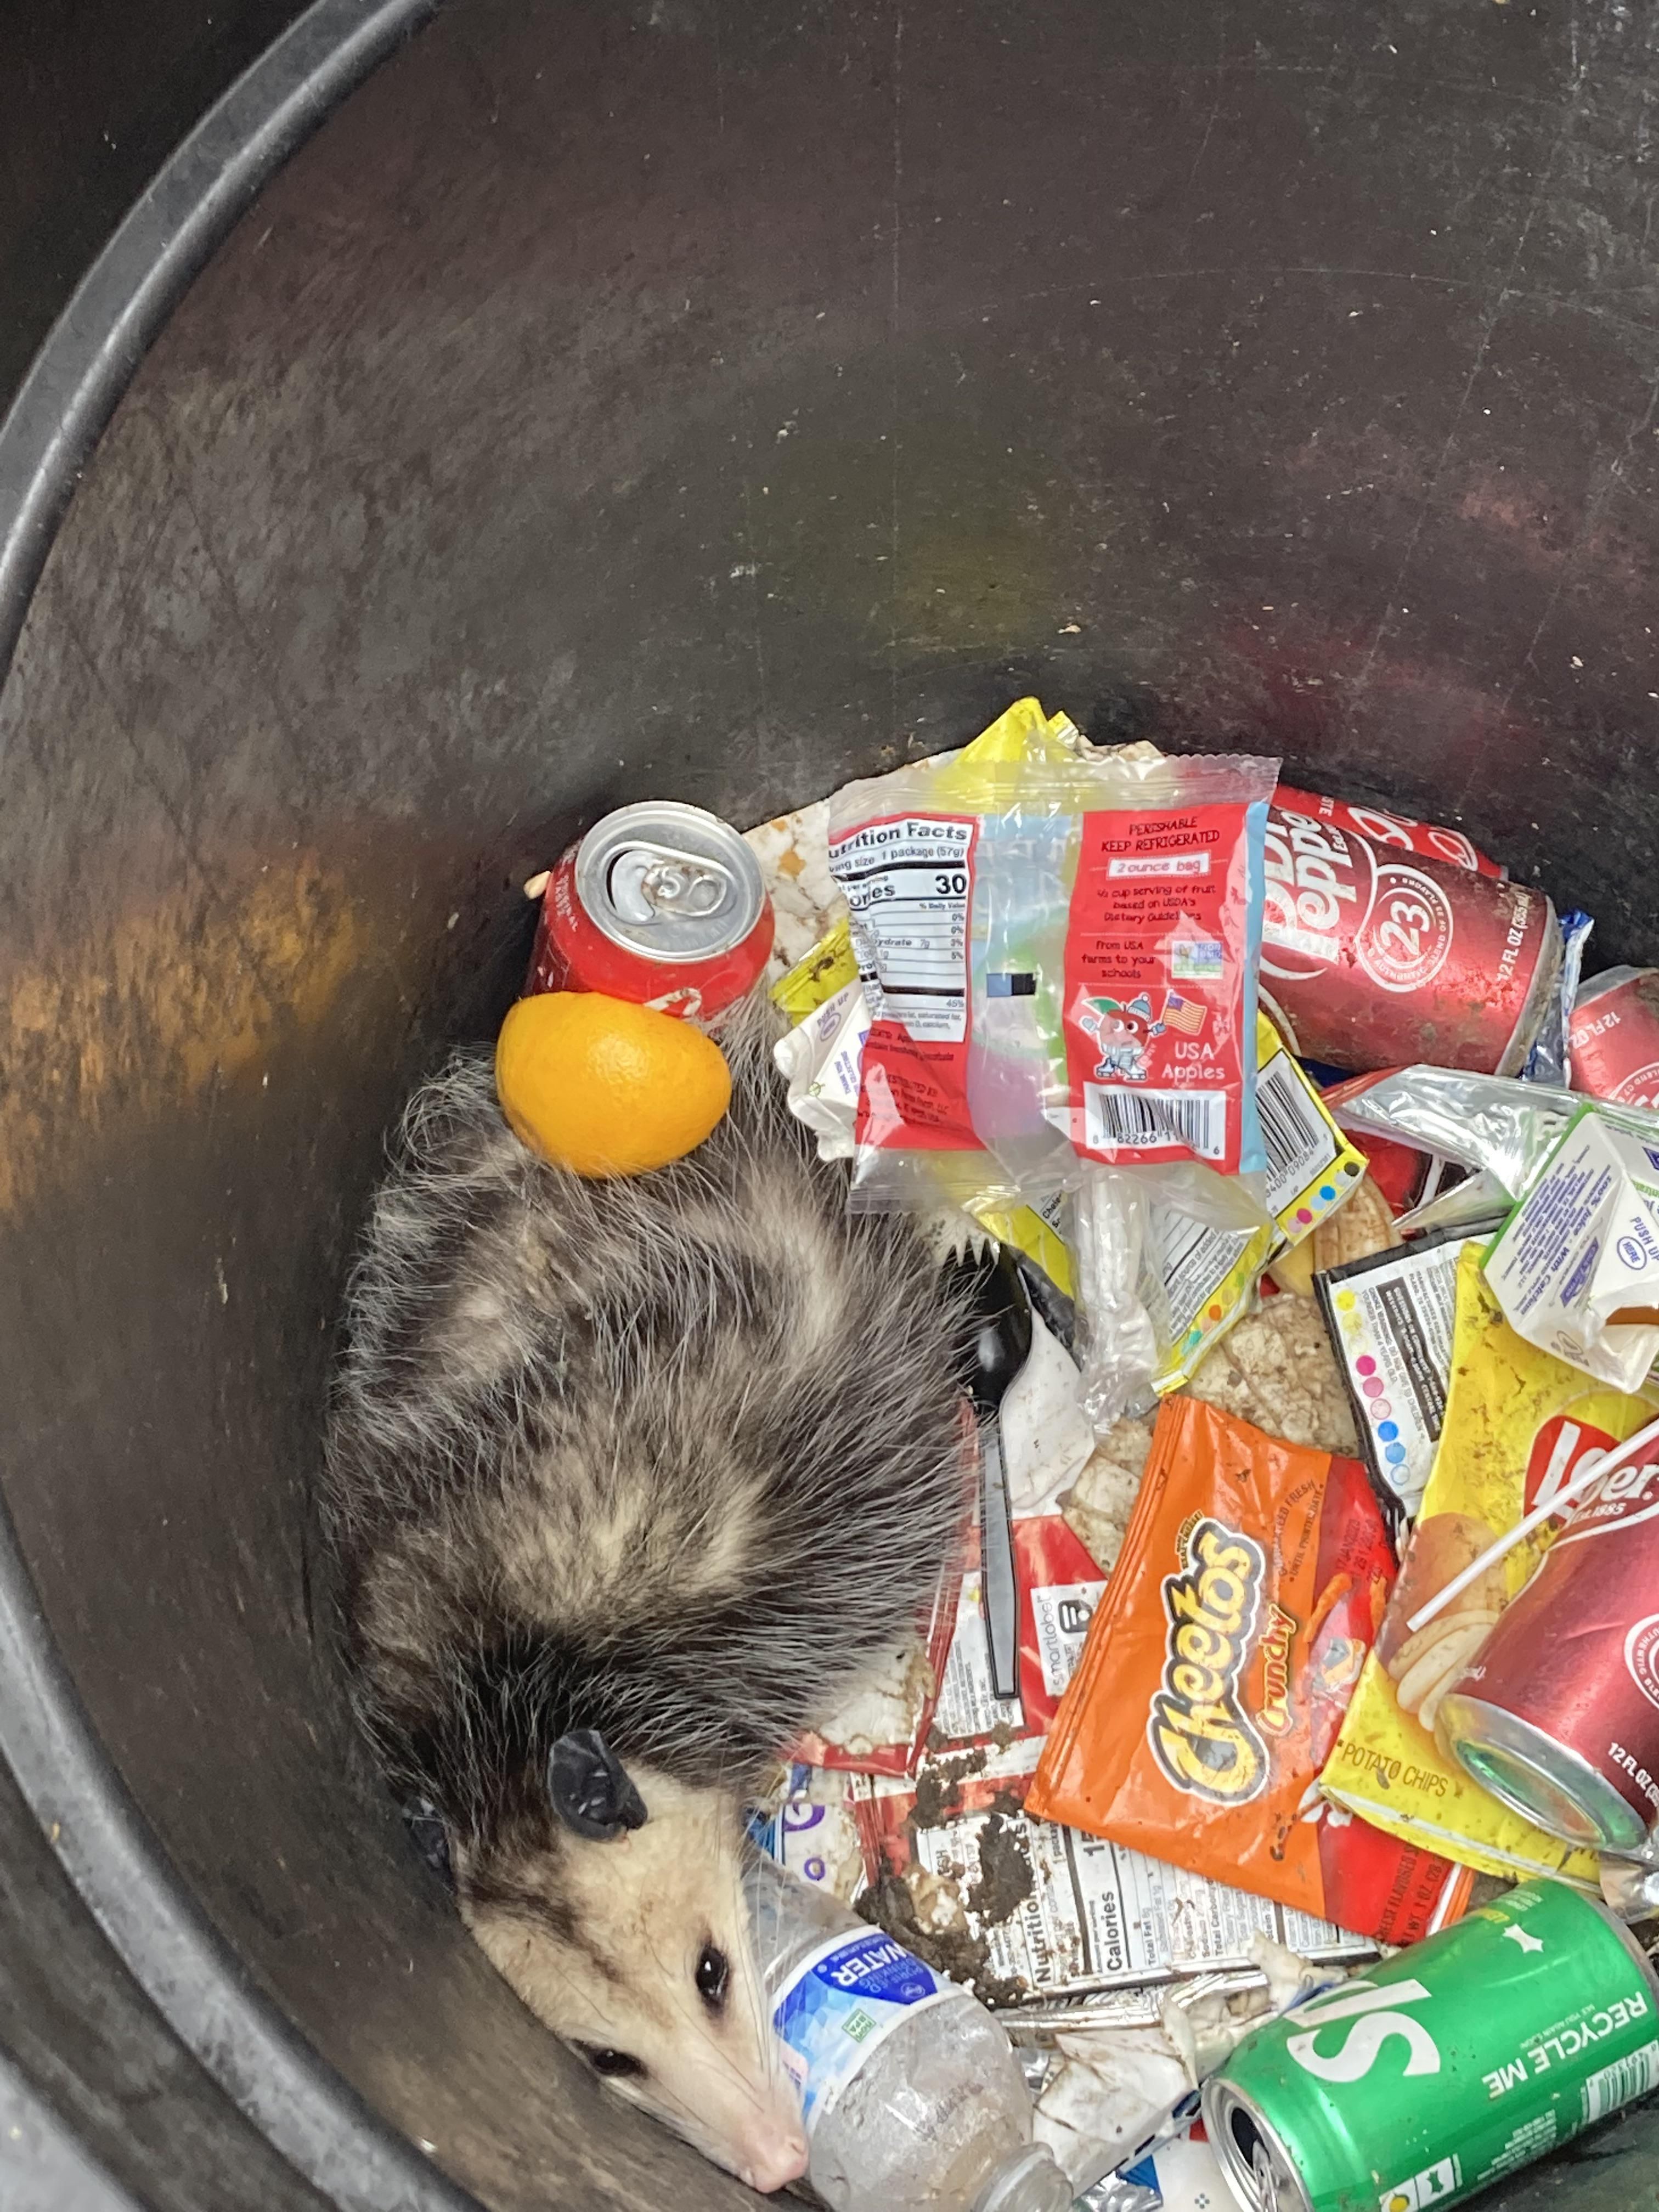 there’s a possum in the trash can